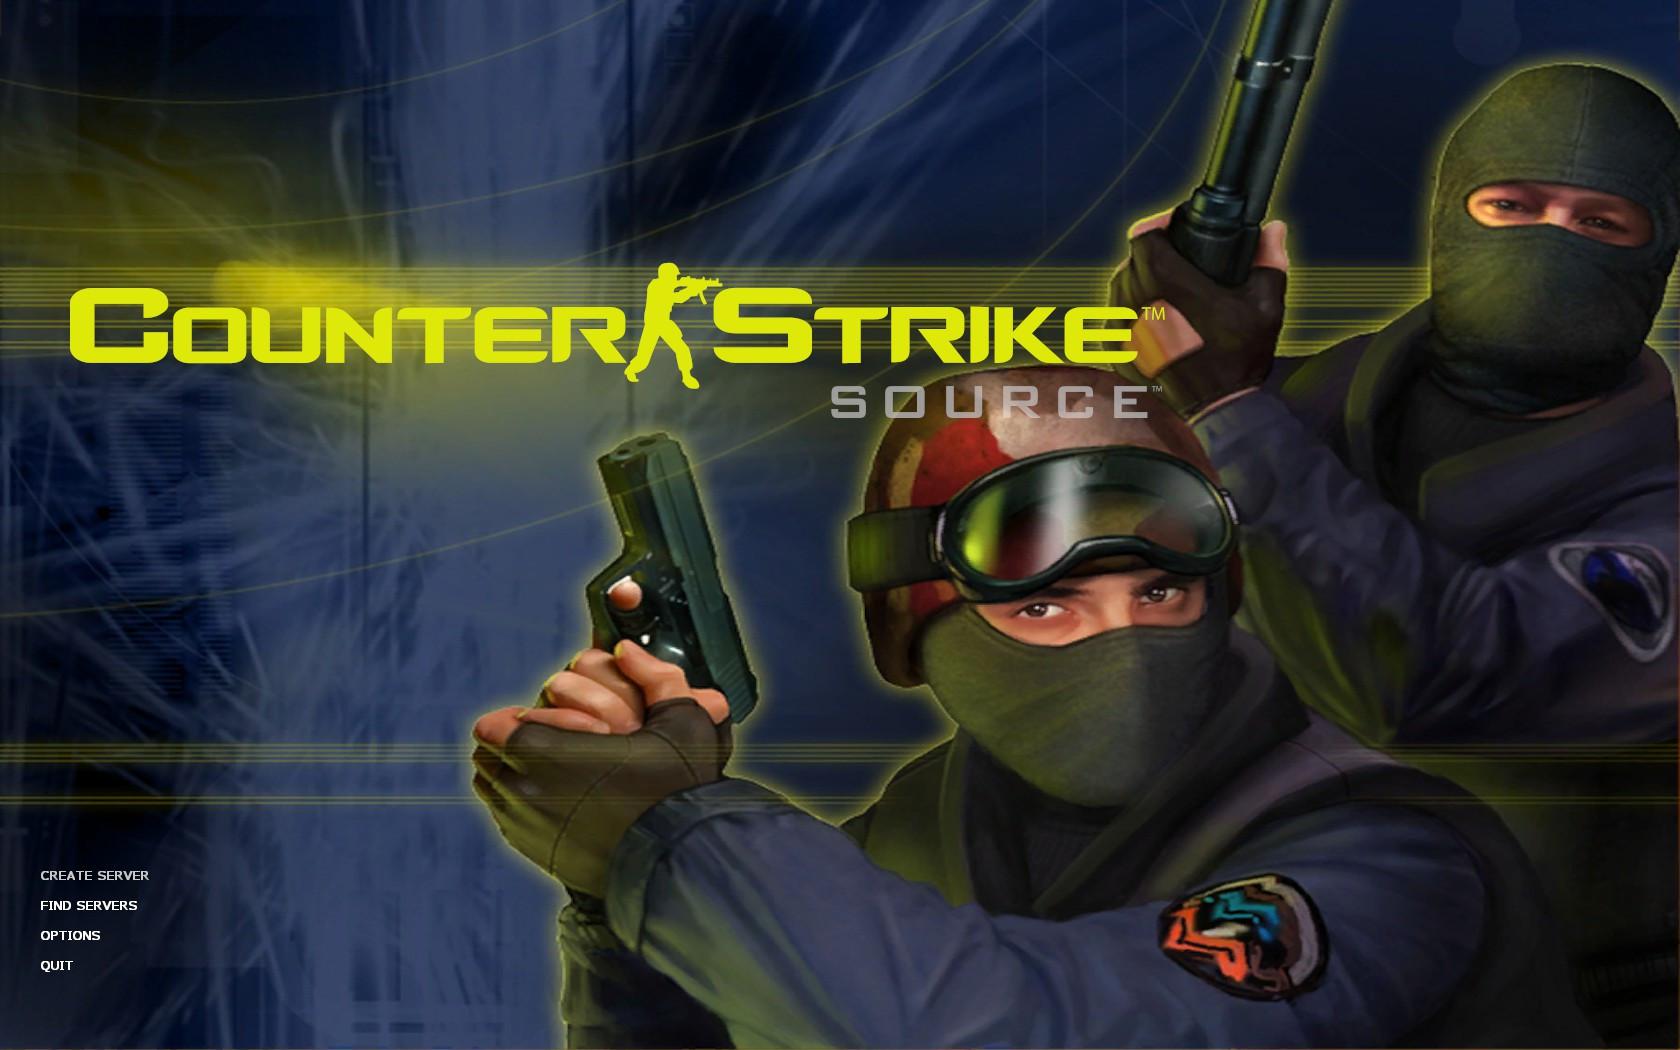 Strike download the new